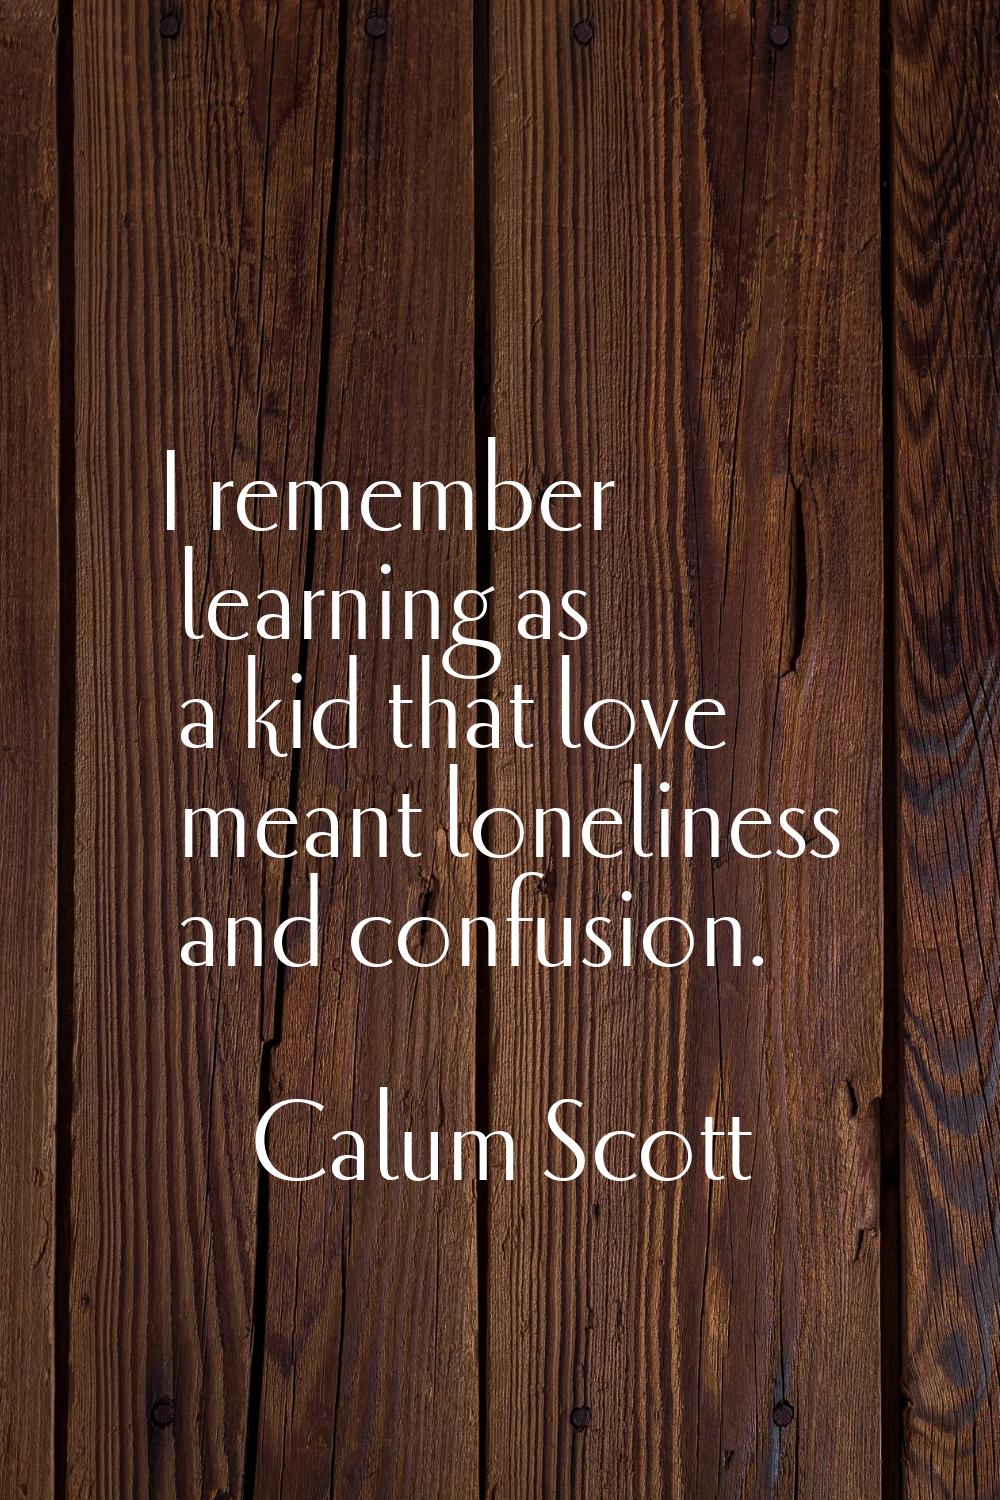 I remember learning as a kid that love meant loneliness and confusion.